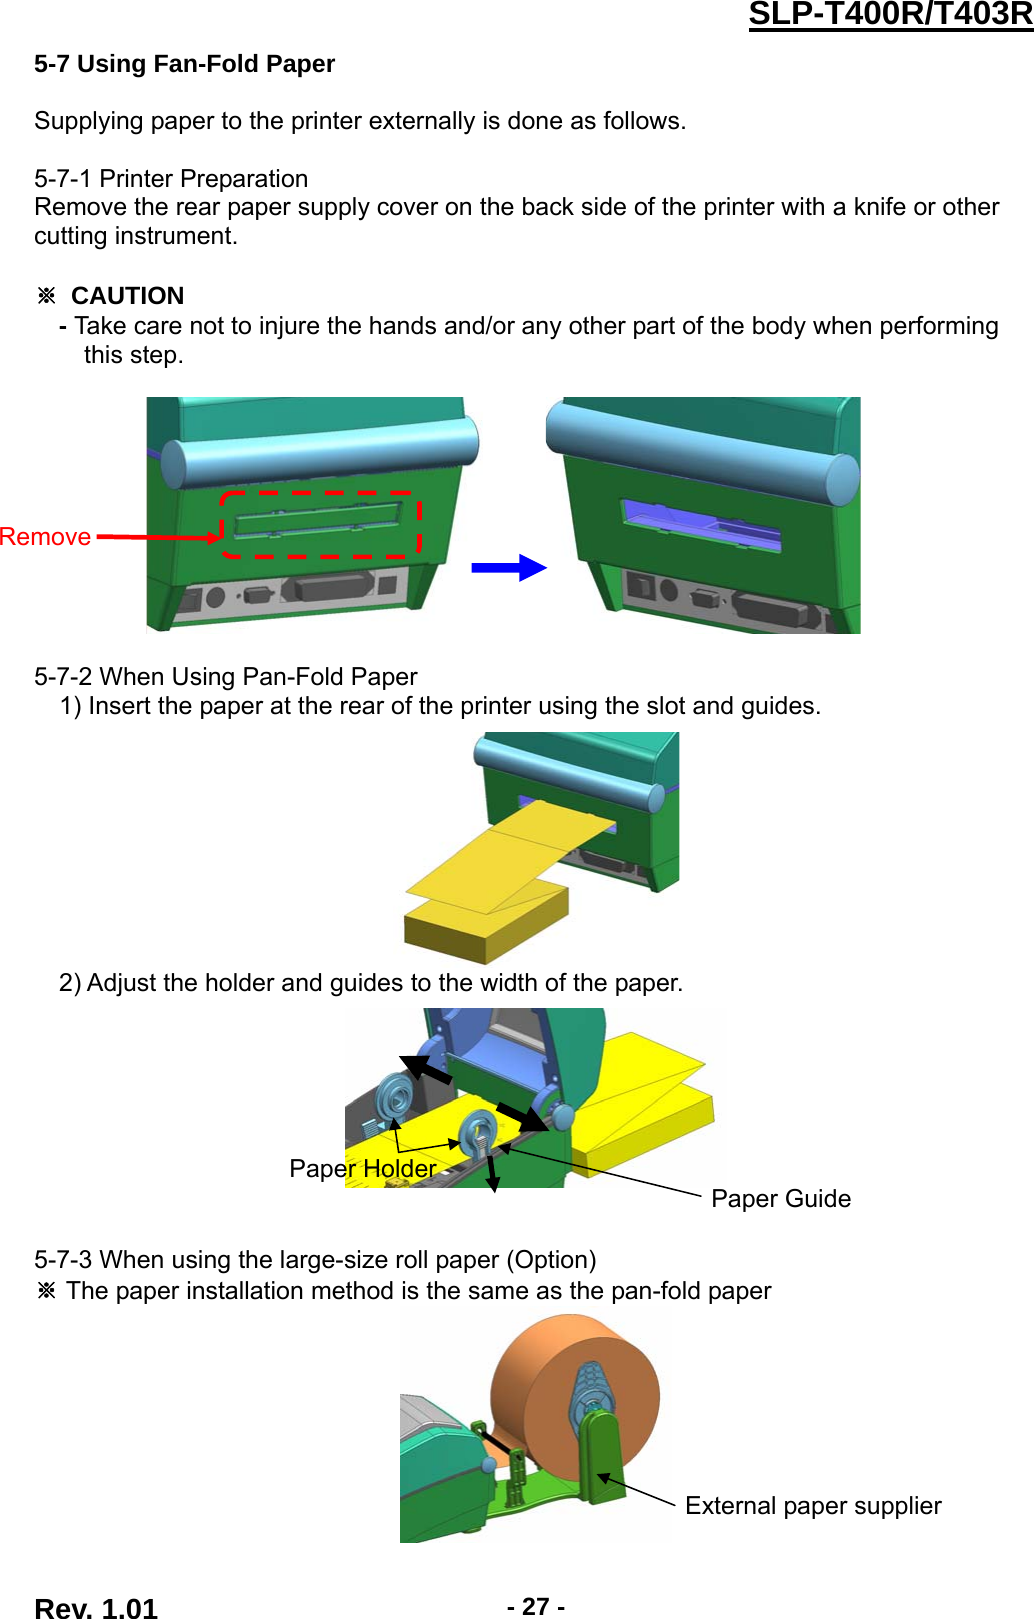  Rev. 1.01  - 27 -SLP-T400R/T403R5-7 Using Fan-Fold Paper  Supplying paper to the printer externally is done as follows.  5-7-1 Printer Preparation Remove the rear paper supply cover on the back side of the printer with a knife or other cutting instrument.  ※ CAUTION - Take care not to injure the hands and/or any other part of the body when performing   this step.                       5-7-2 When Using Pan-Fold Paper 1) Insert the paper at the rear of the printer using the slot and guides.   2) Adjust the holder and guides to the width of the paper.     5-7-3 When using the large-size roll paper (Option) ※ The paper installation method is the same as the pan-fold paper  Remove Paper Guide Paper Holder External paper supplier 